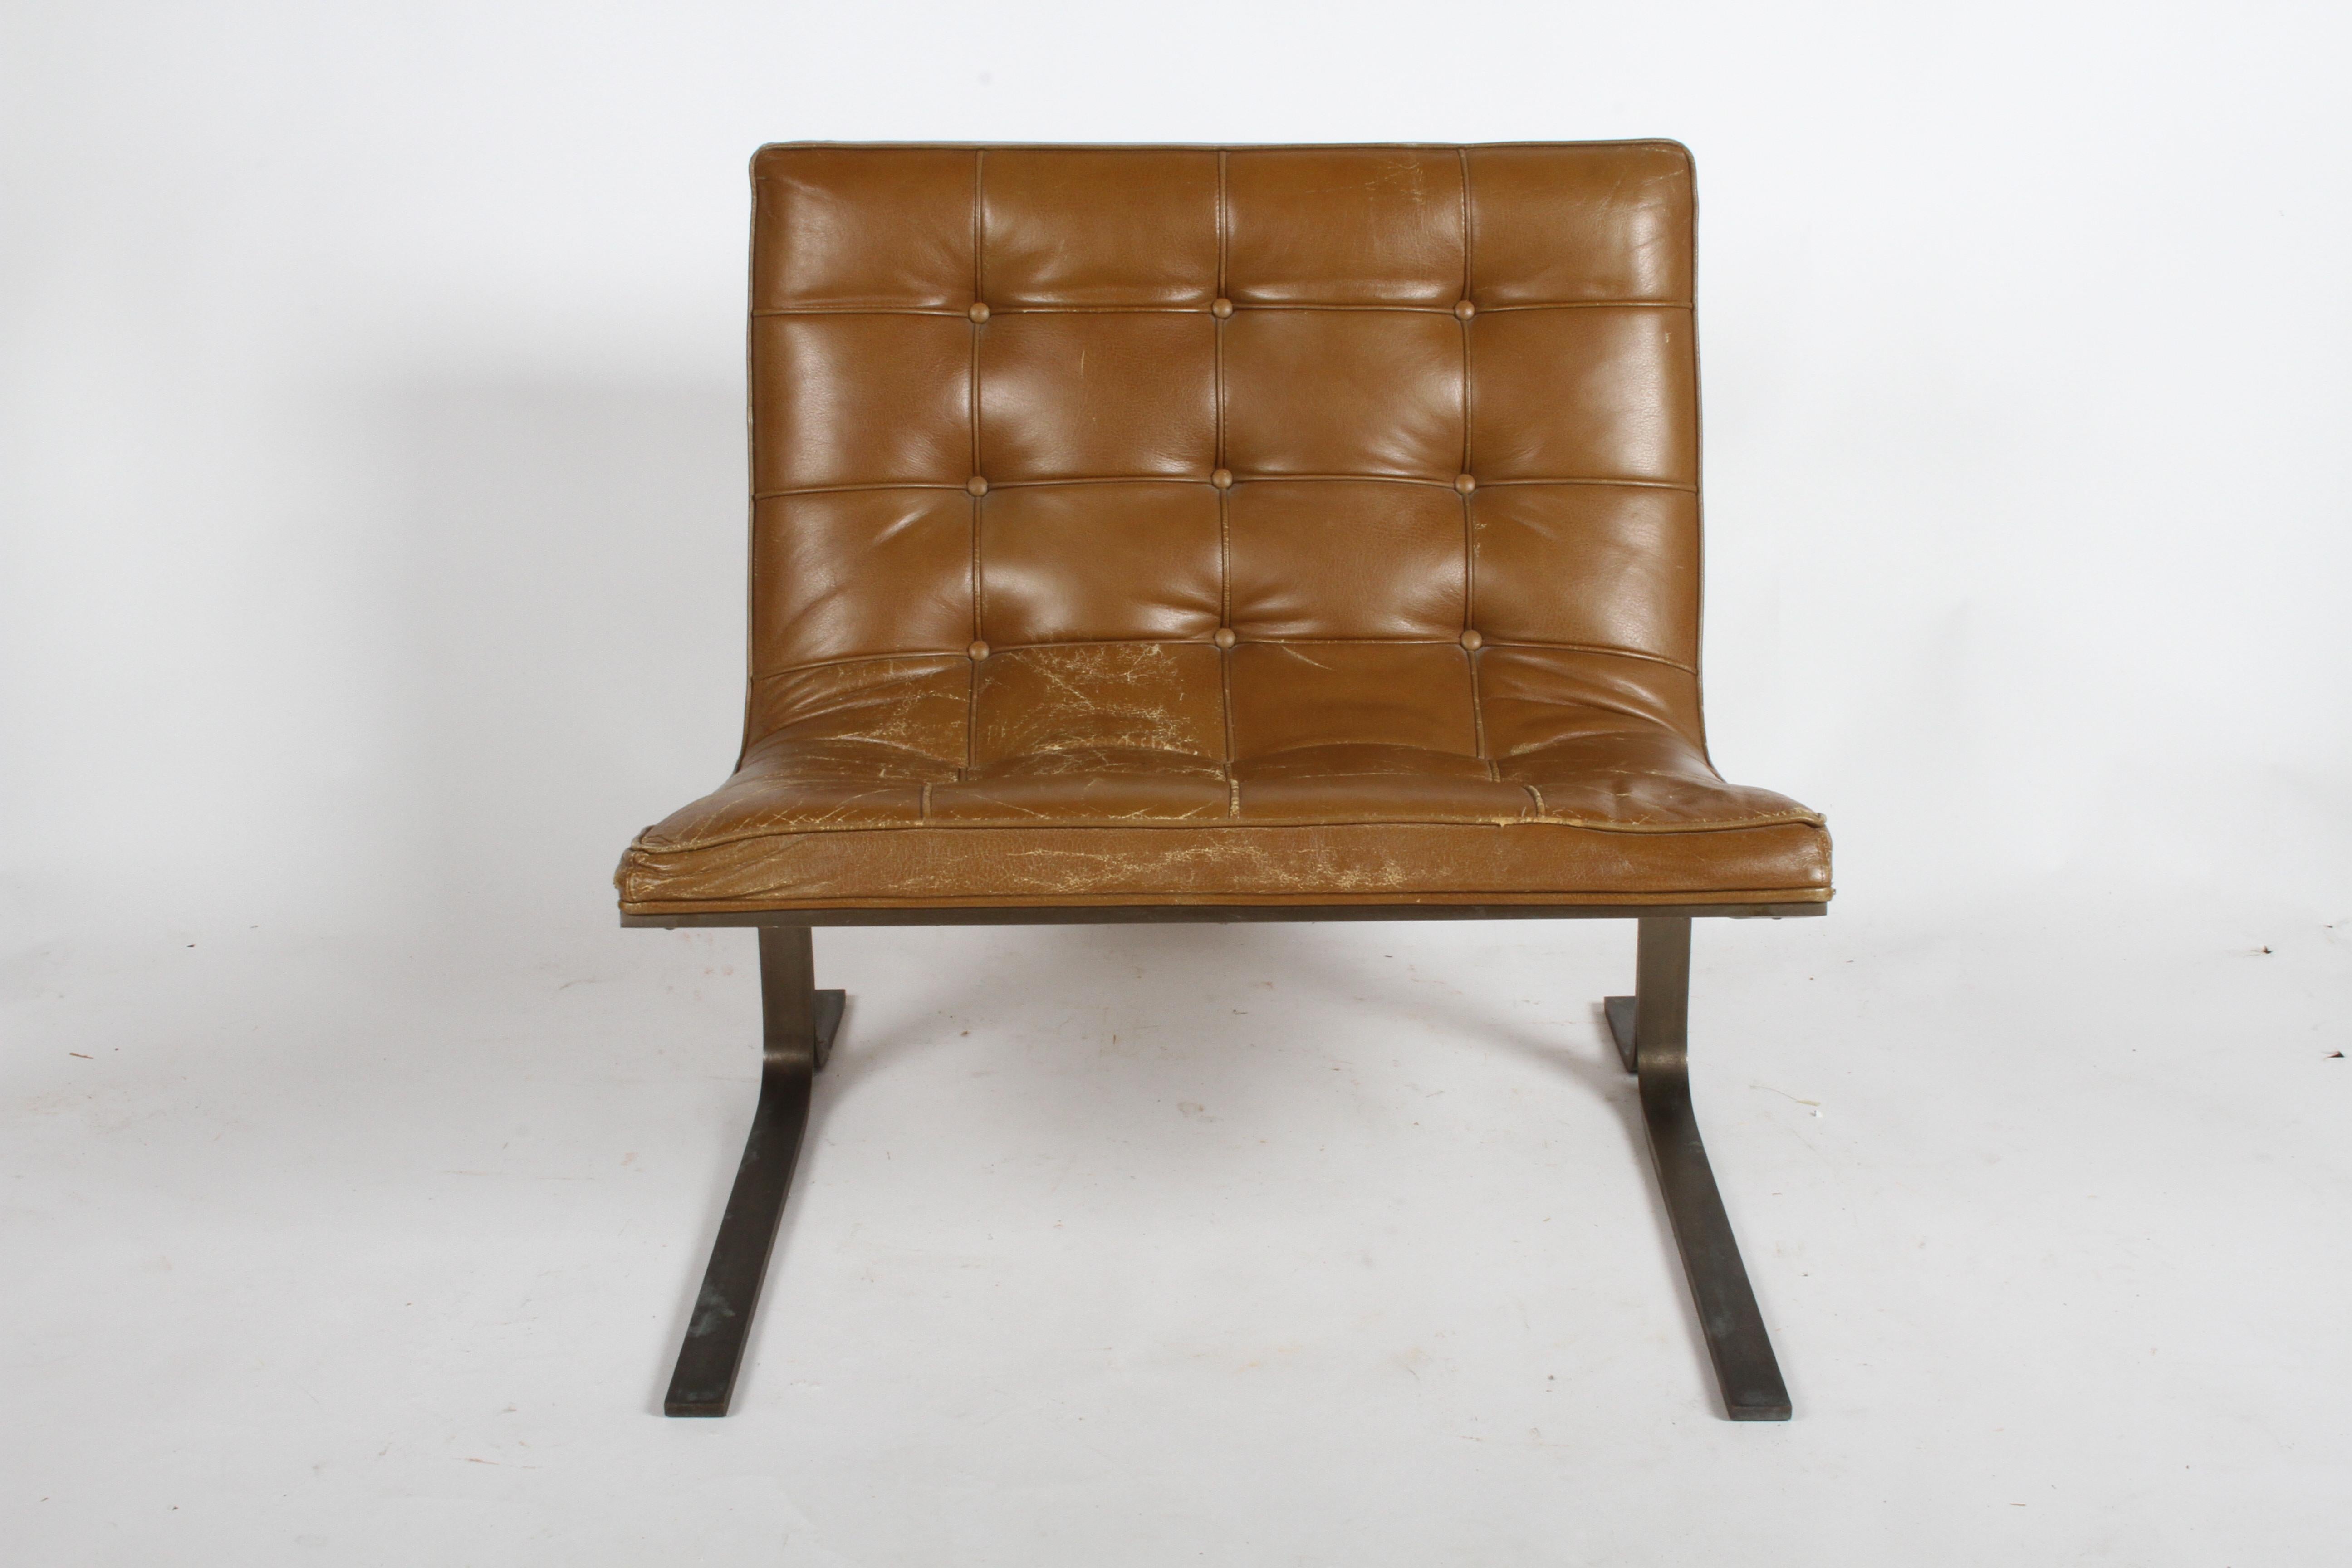 Mid-Century Modern CH28 lounge chairs by architect Nicos Zographos with Carmel tufted leather seats and bronze bases, circa 1960s. Pair available, priced per chair. Designed and manufactured by Nicos Zographos Designs Ltd. Nicos designed this chair